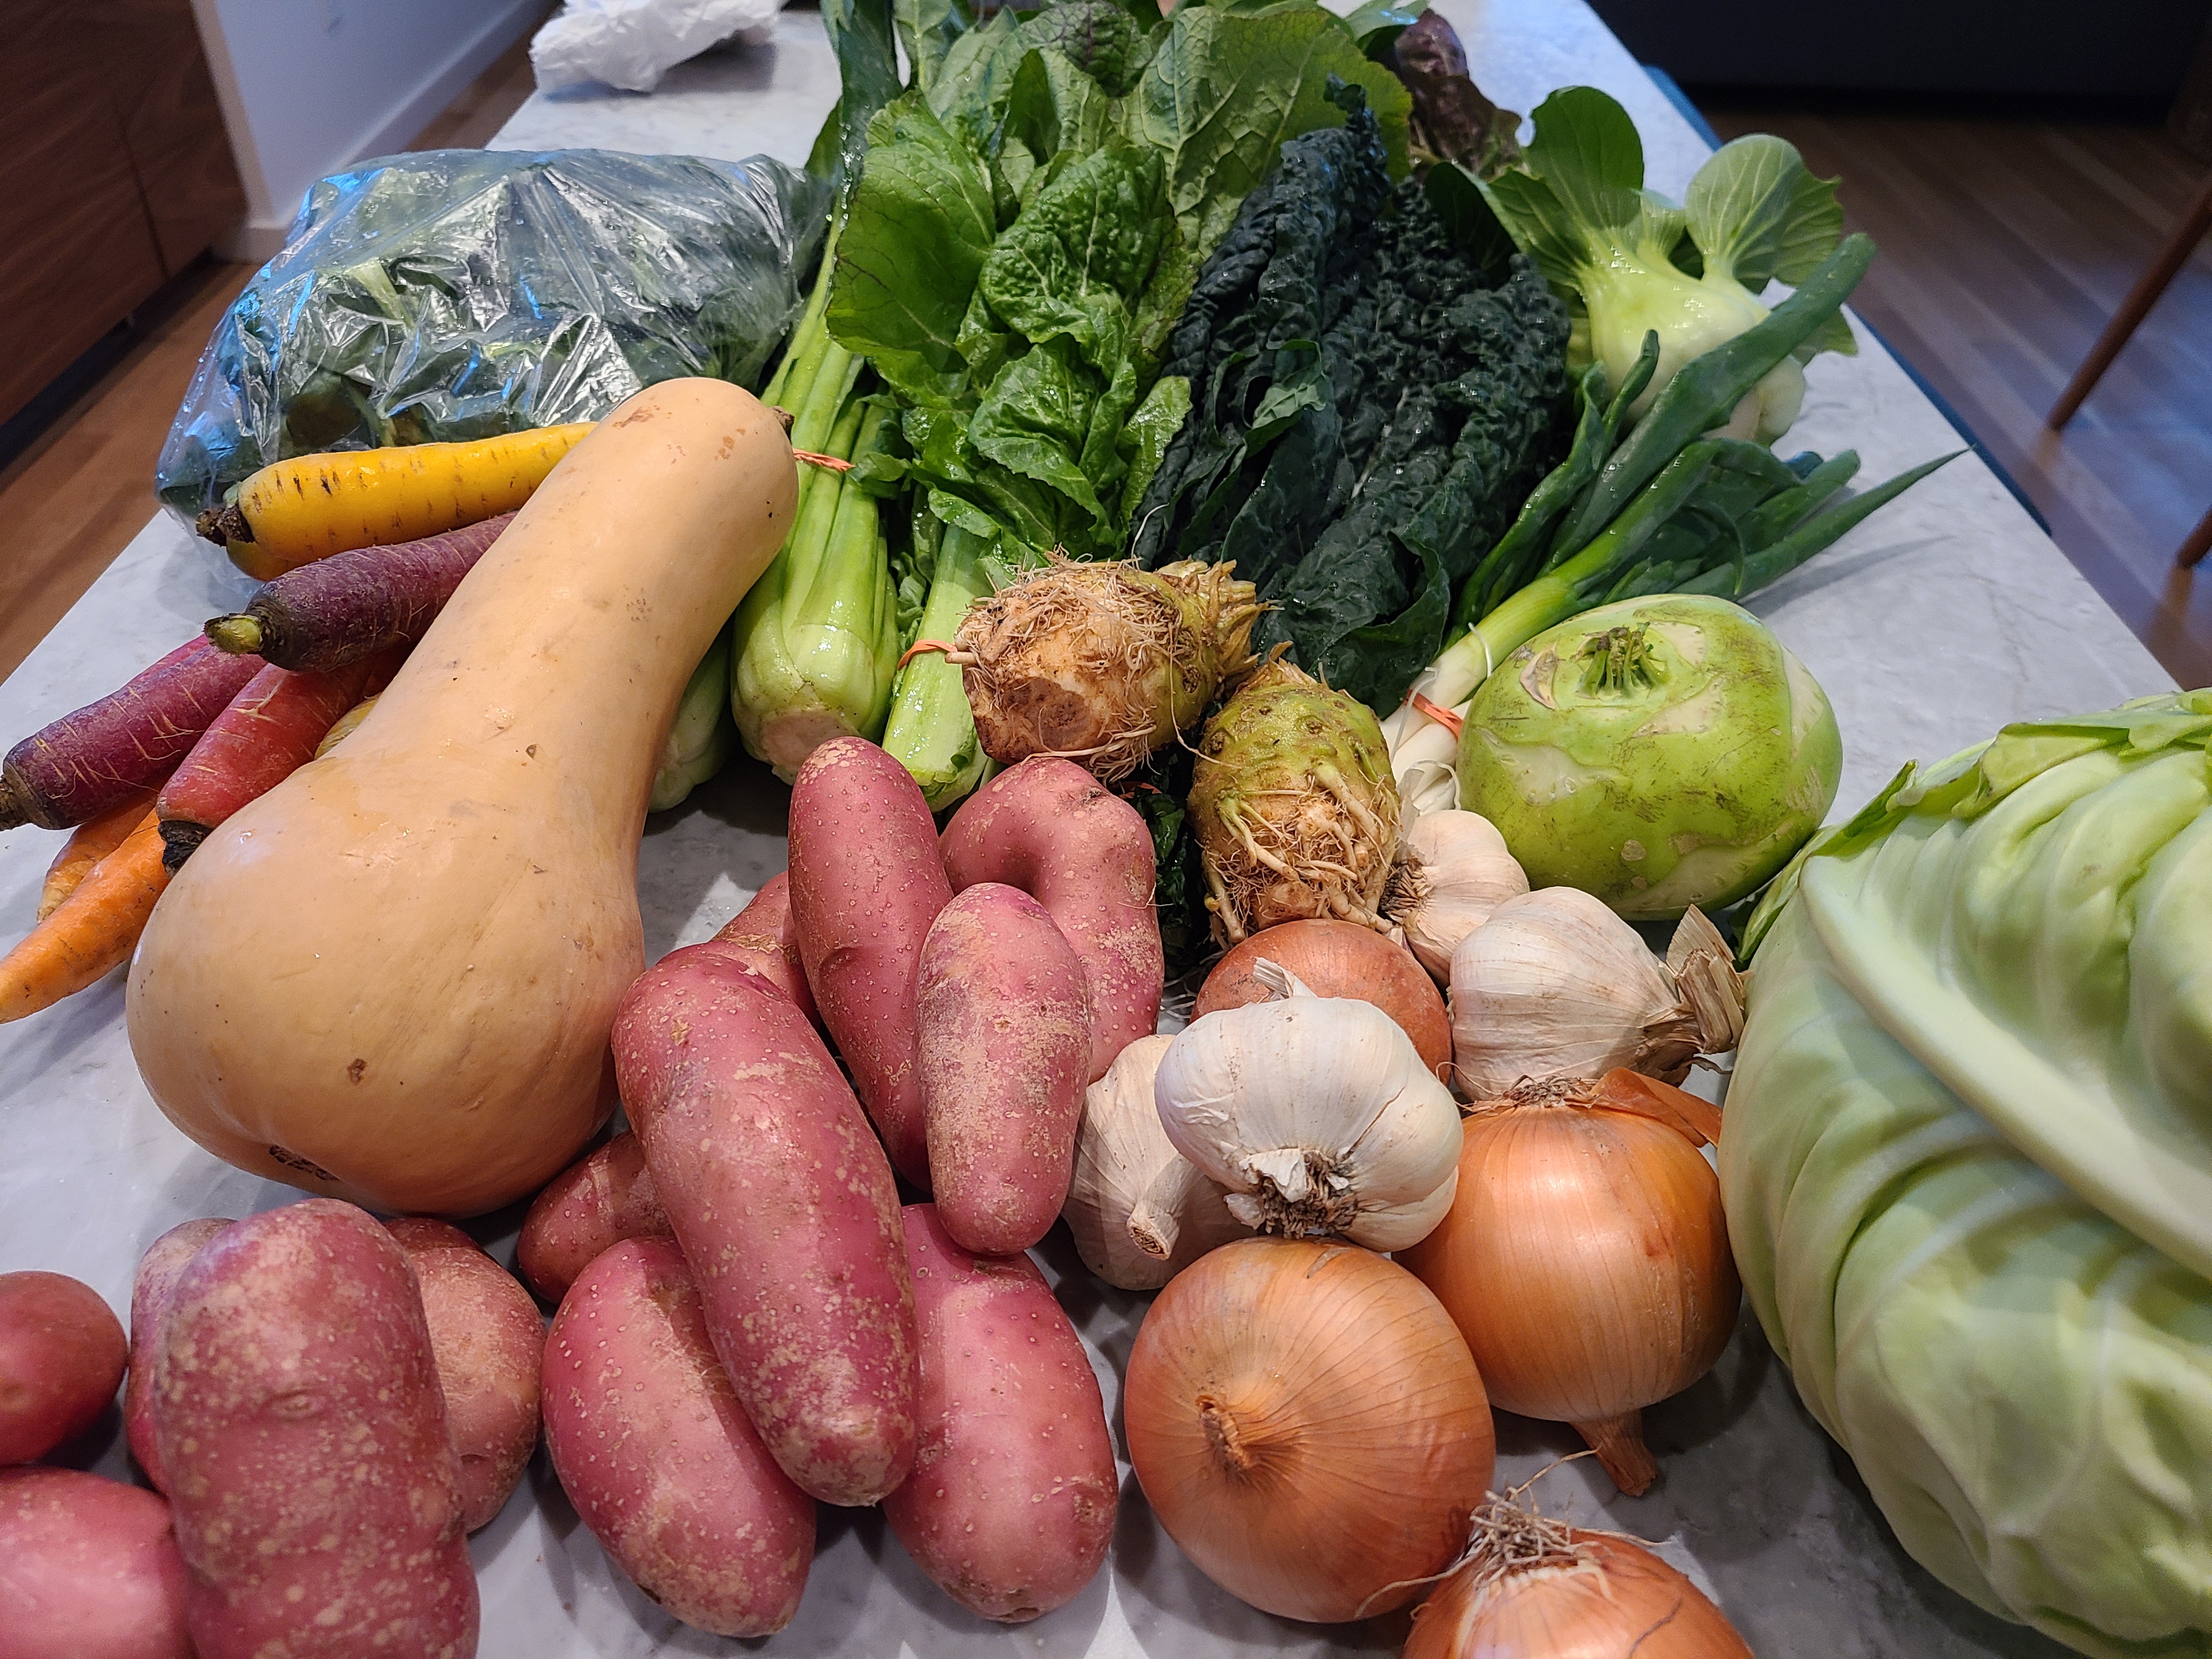 Winter CSA in the Hudson Valley